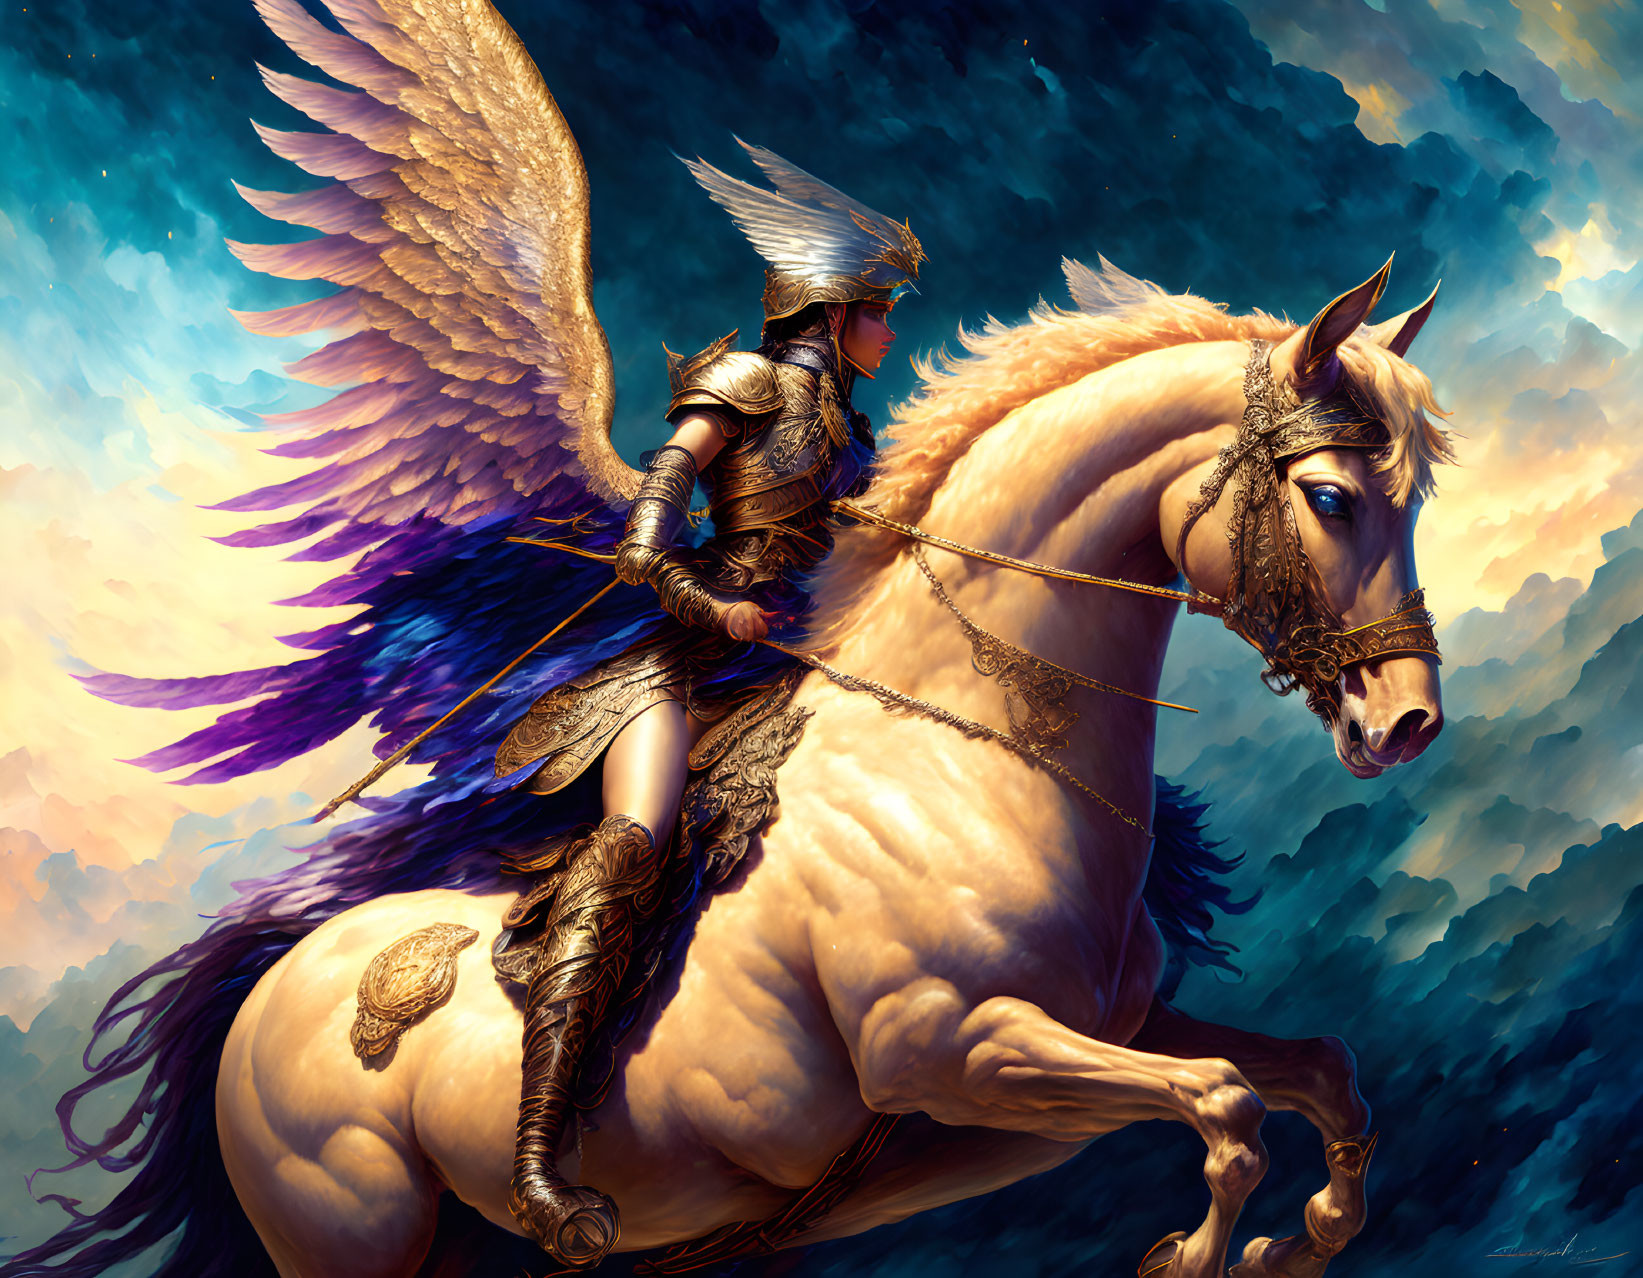 Winged horse and armored warrior soar through dramatic sky